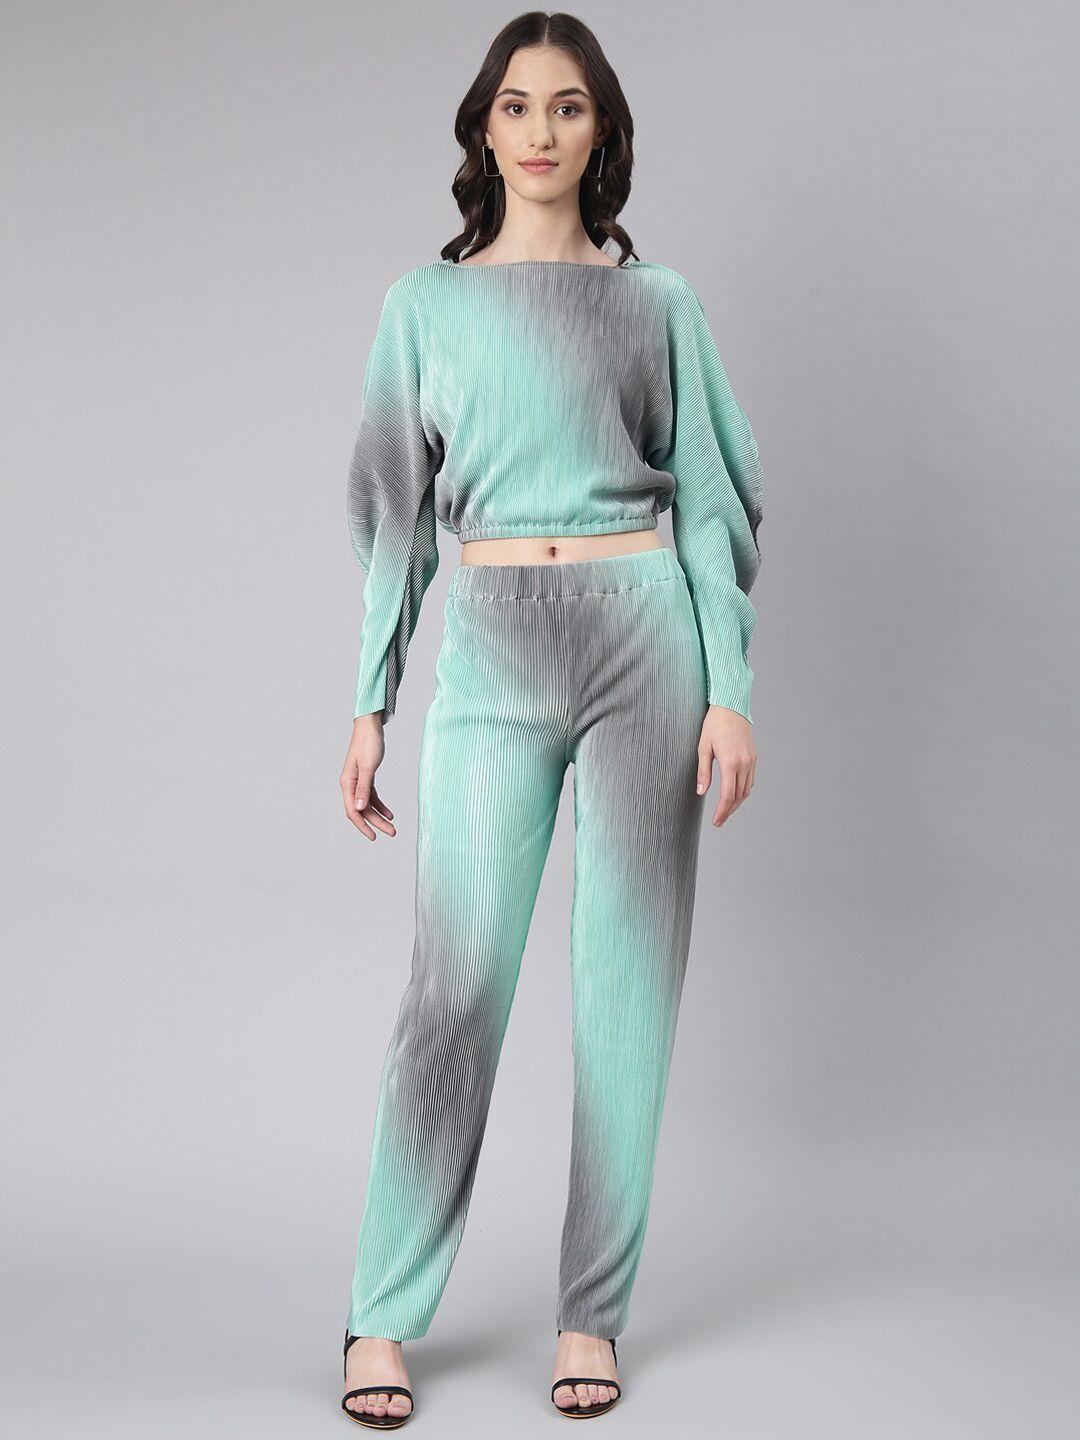 showoff boat neck long sleeves dyed top & trousers